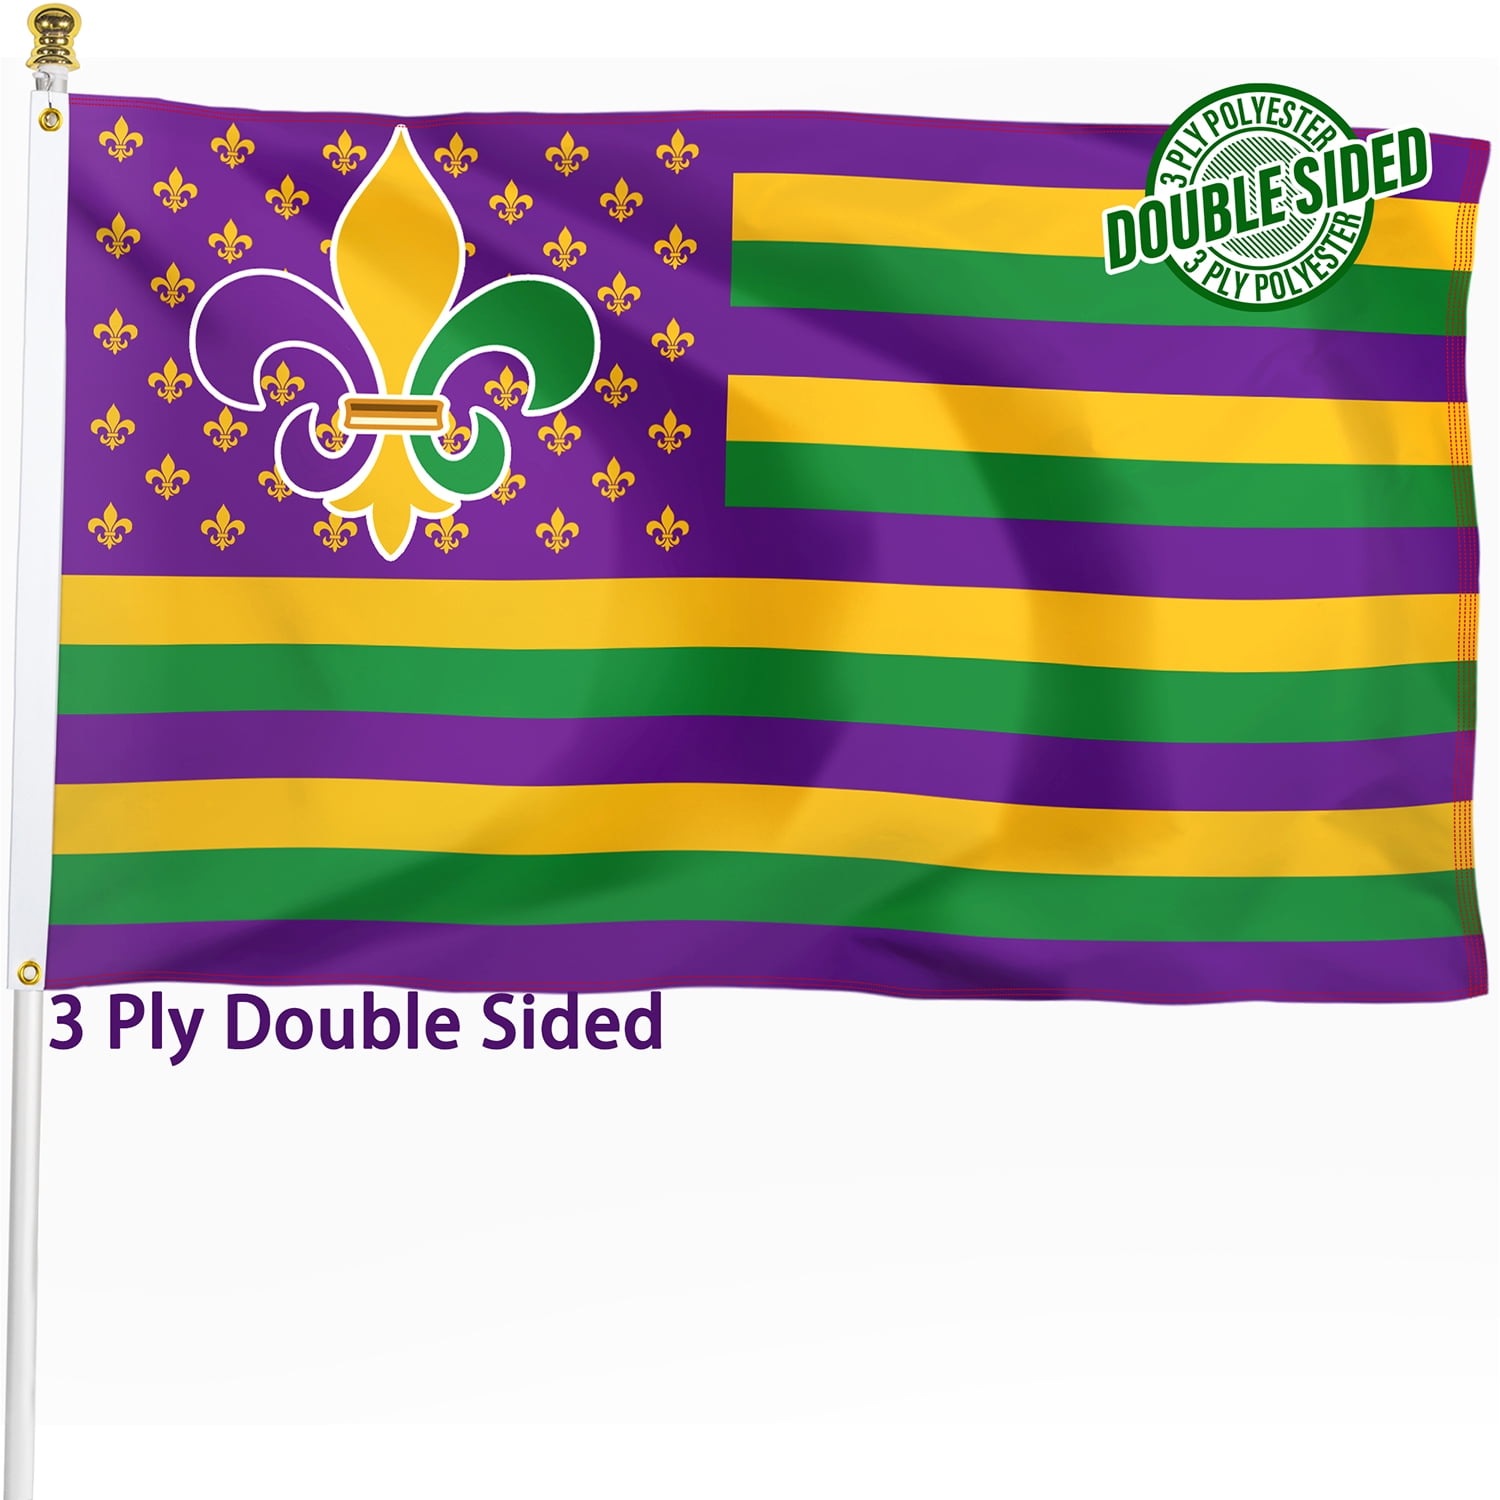 Mardi Gras Decorations Garden Flag, Happiwiz 12 x 18 Inch New Orleans Party  Decorations Mardi Gras Hanging Yard Flag for Home Masquerade Party Outdoor